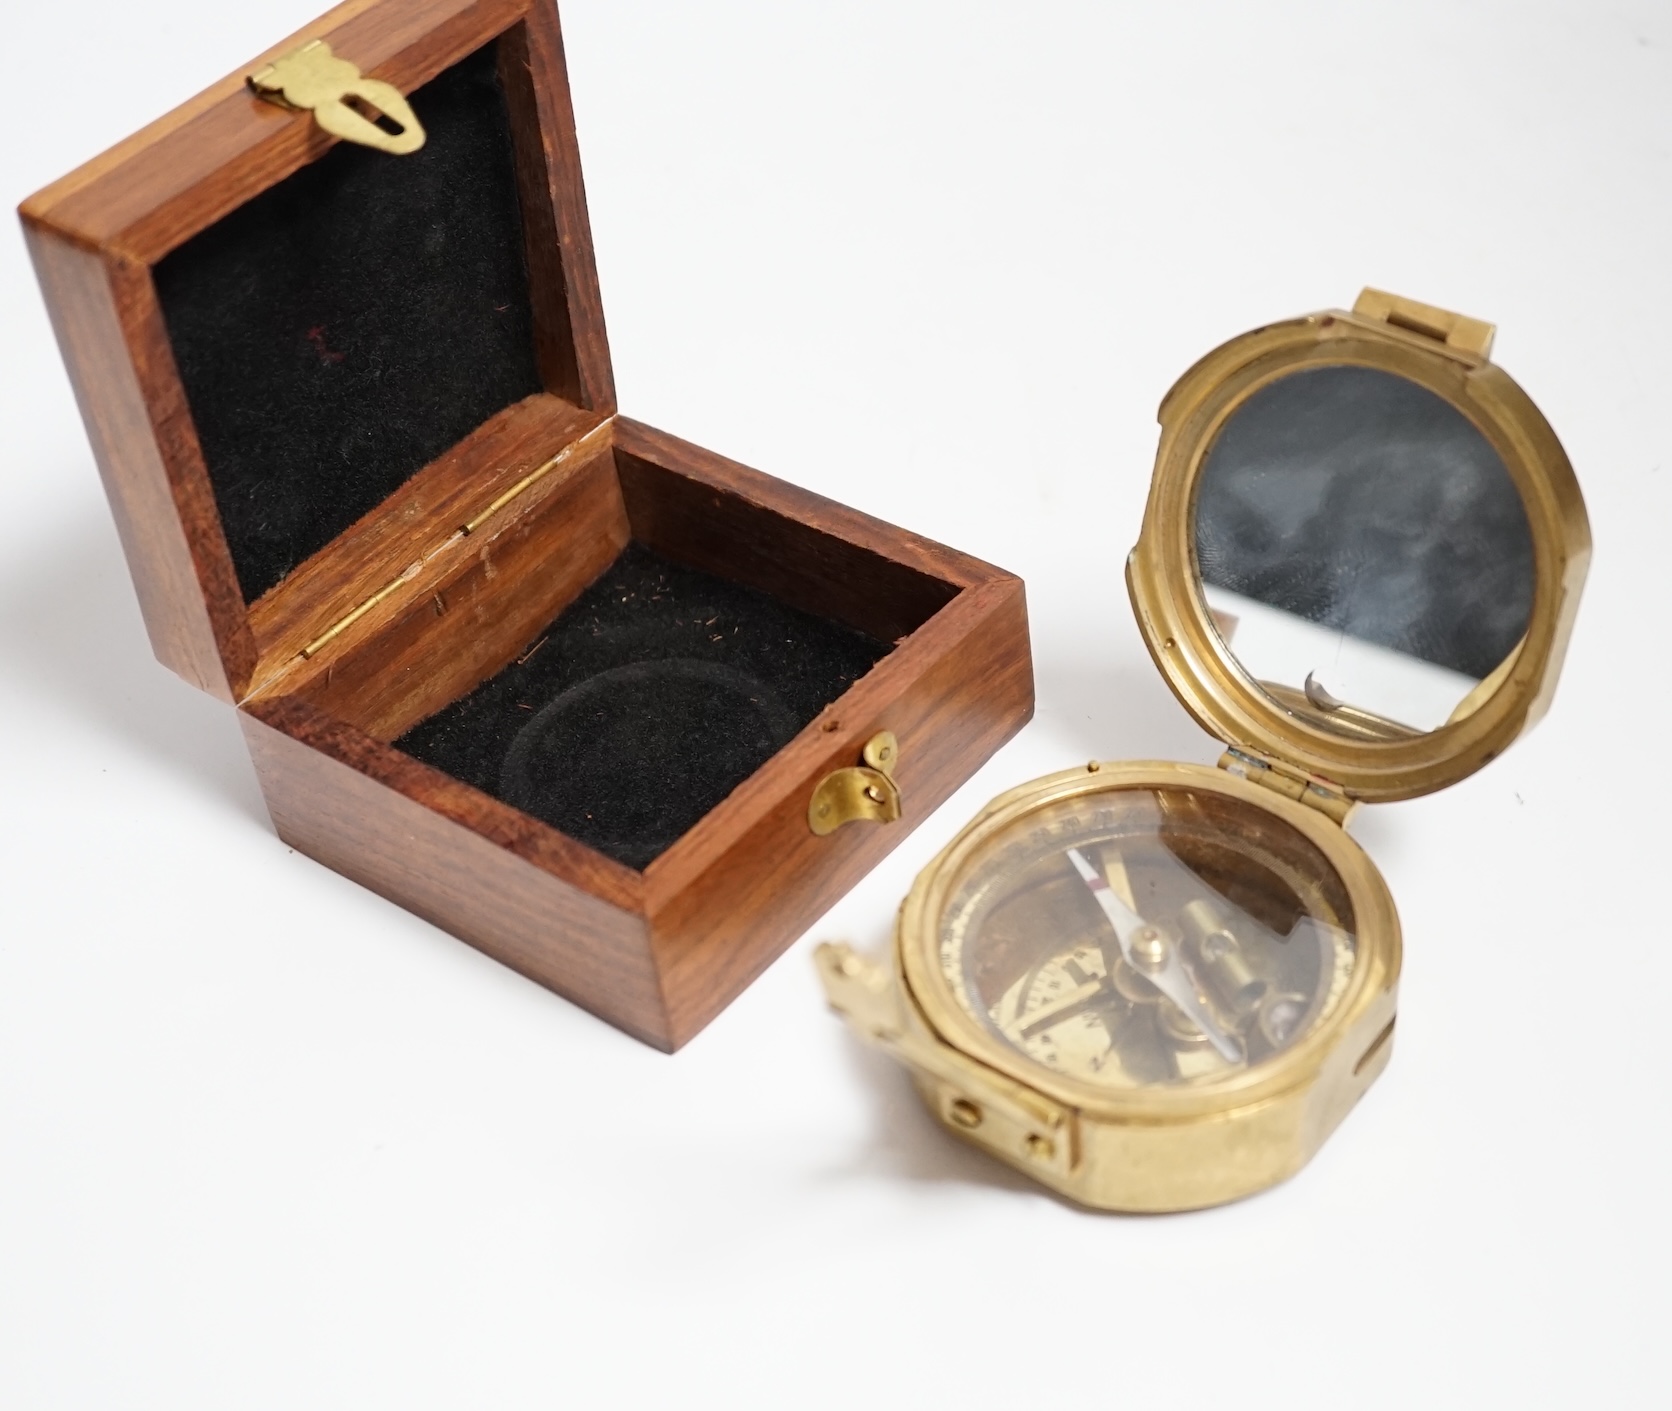 A gilt metal circular pocket barometer by Gallagher and Co., New Bond Street, London (lacks case) and a reproduction solid brass Brunton nautical compass in wooden box                                                     